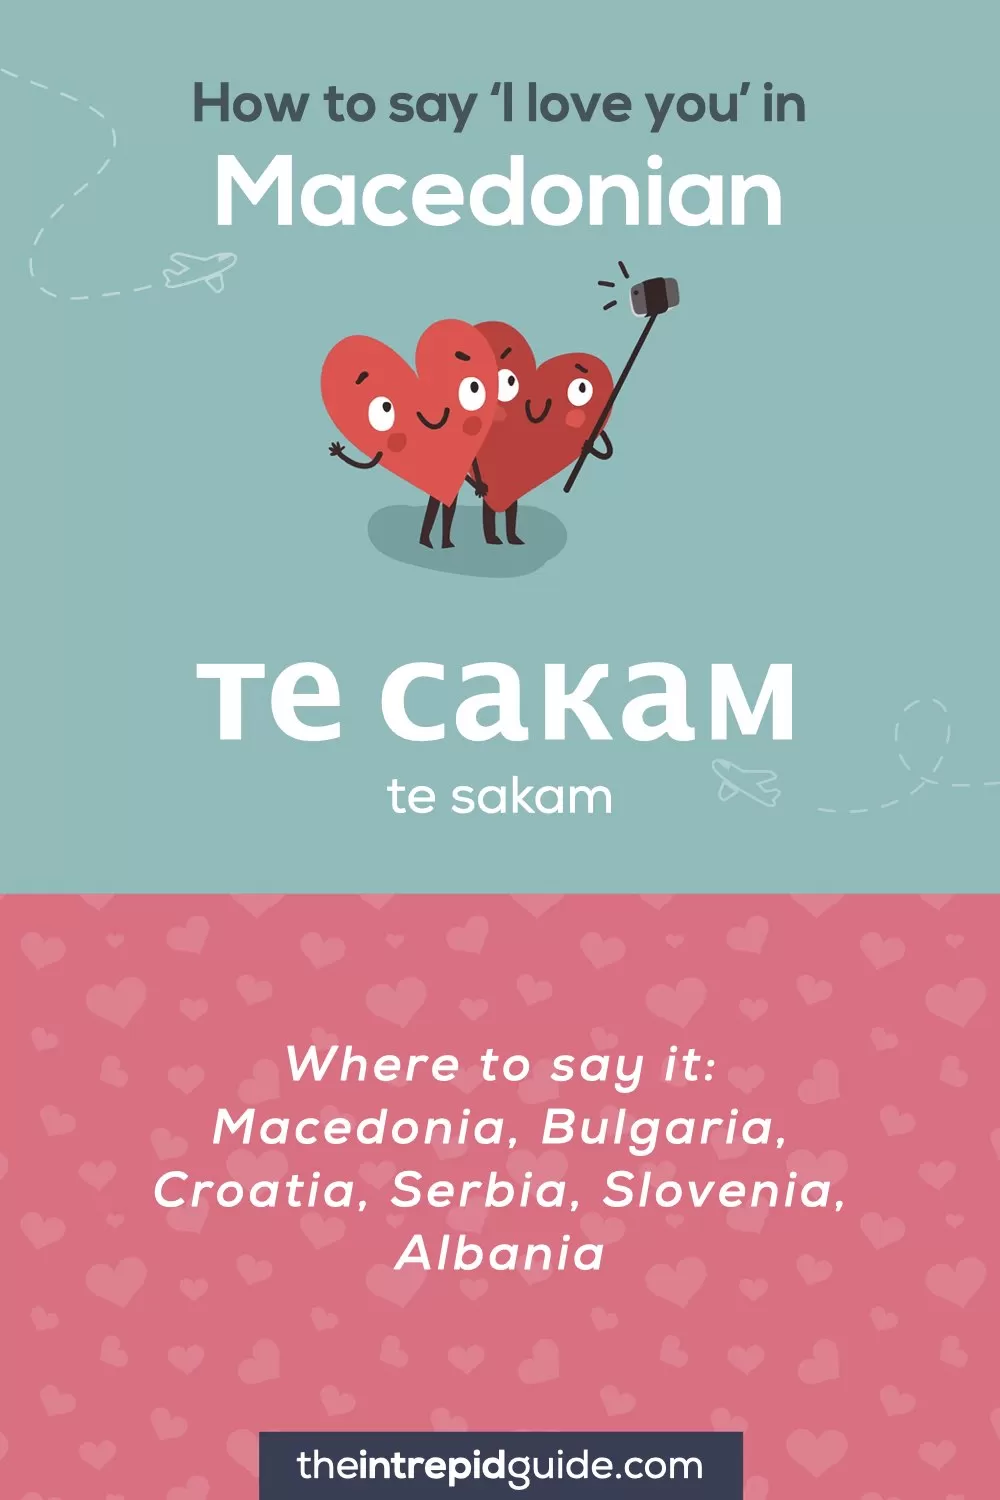 How to say I love you in different languages - Macedonian - те сакам